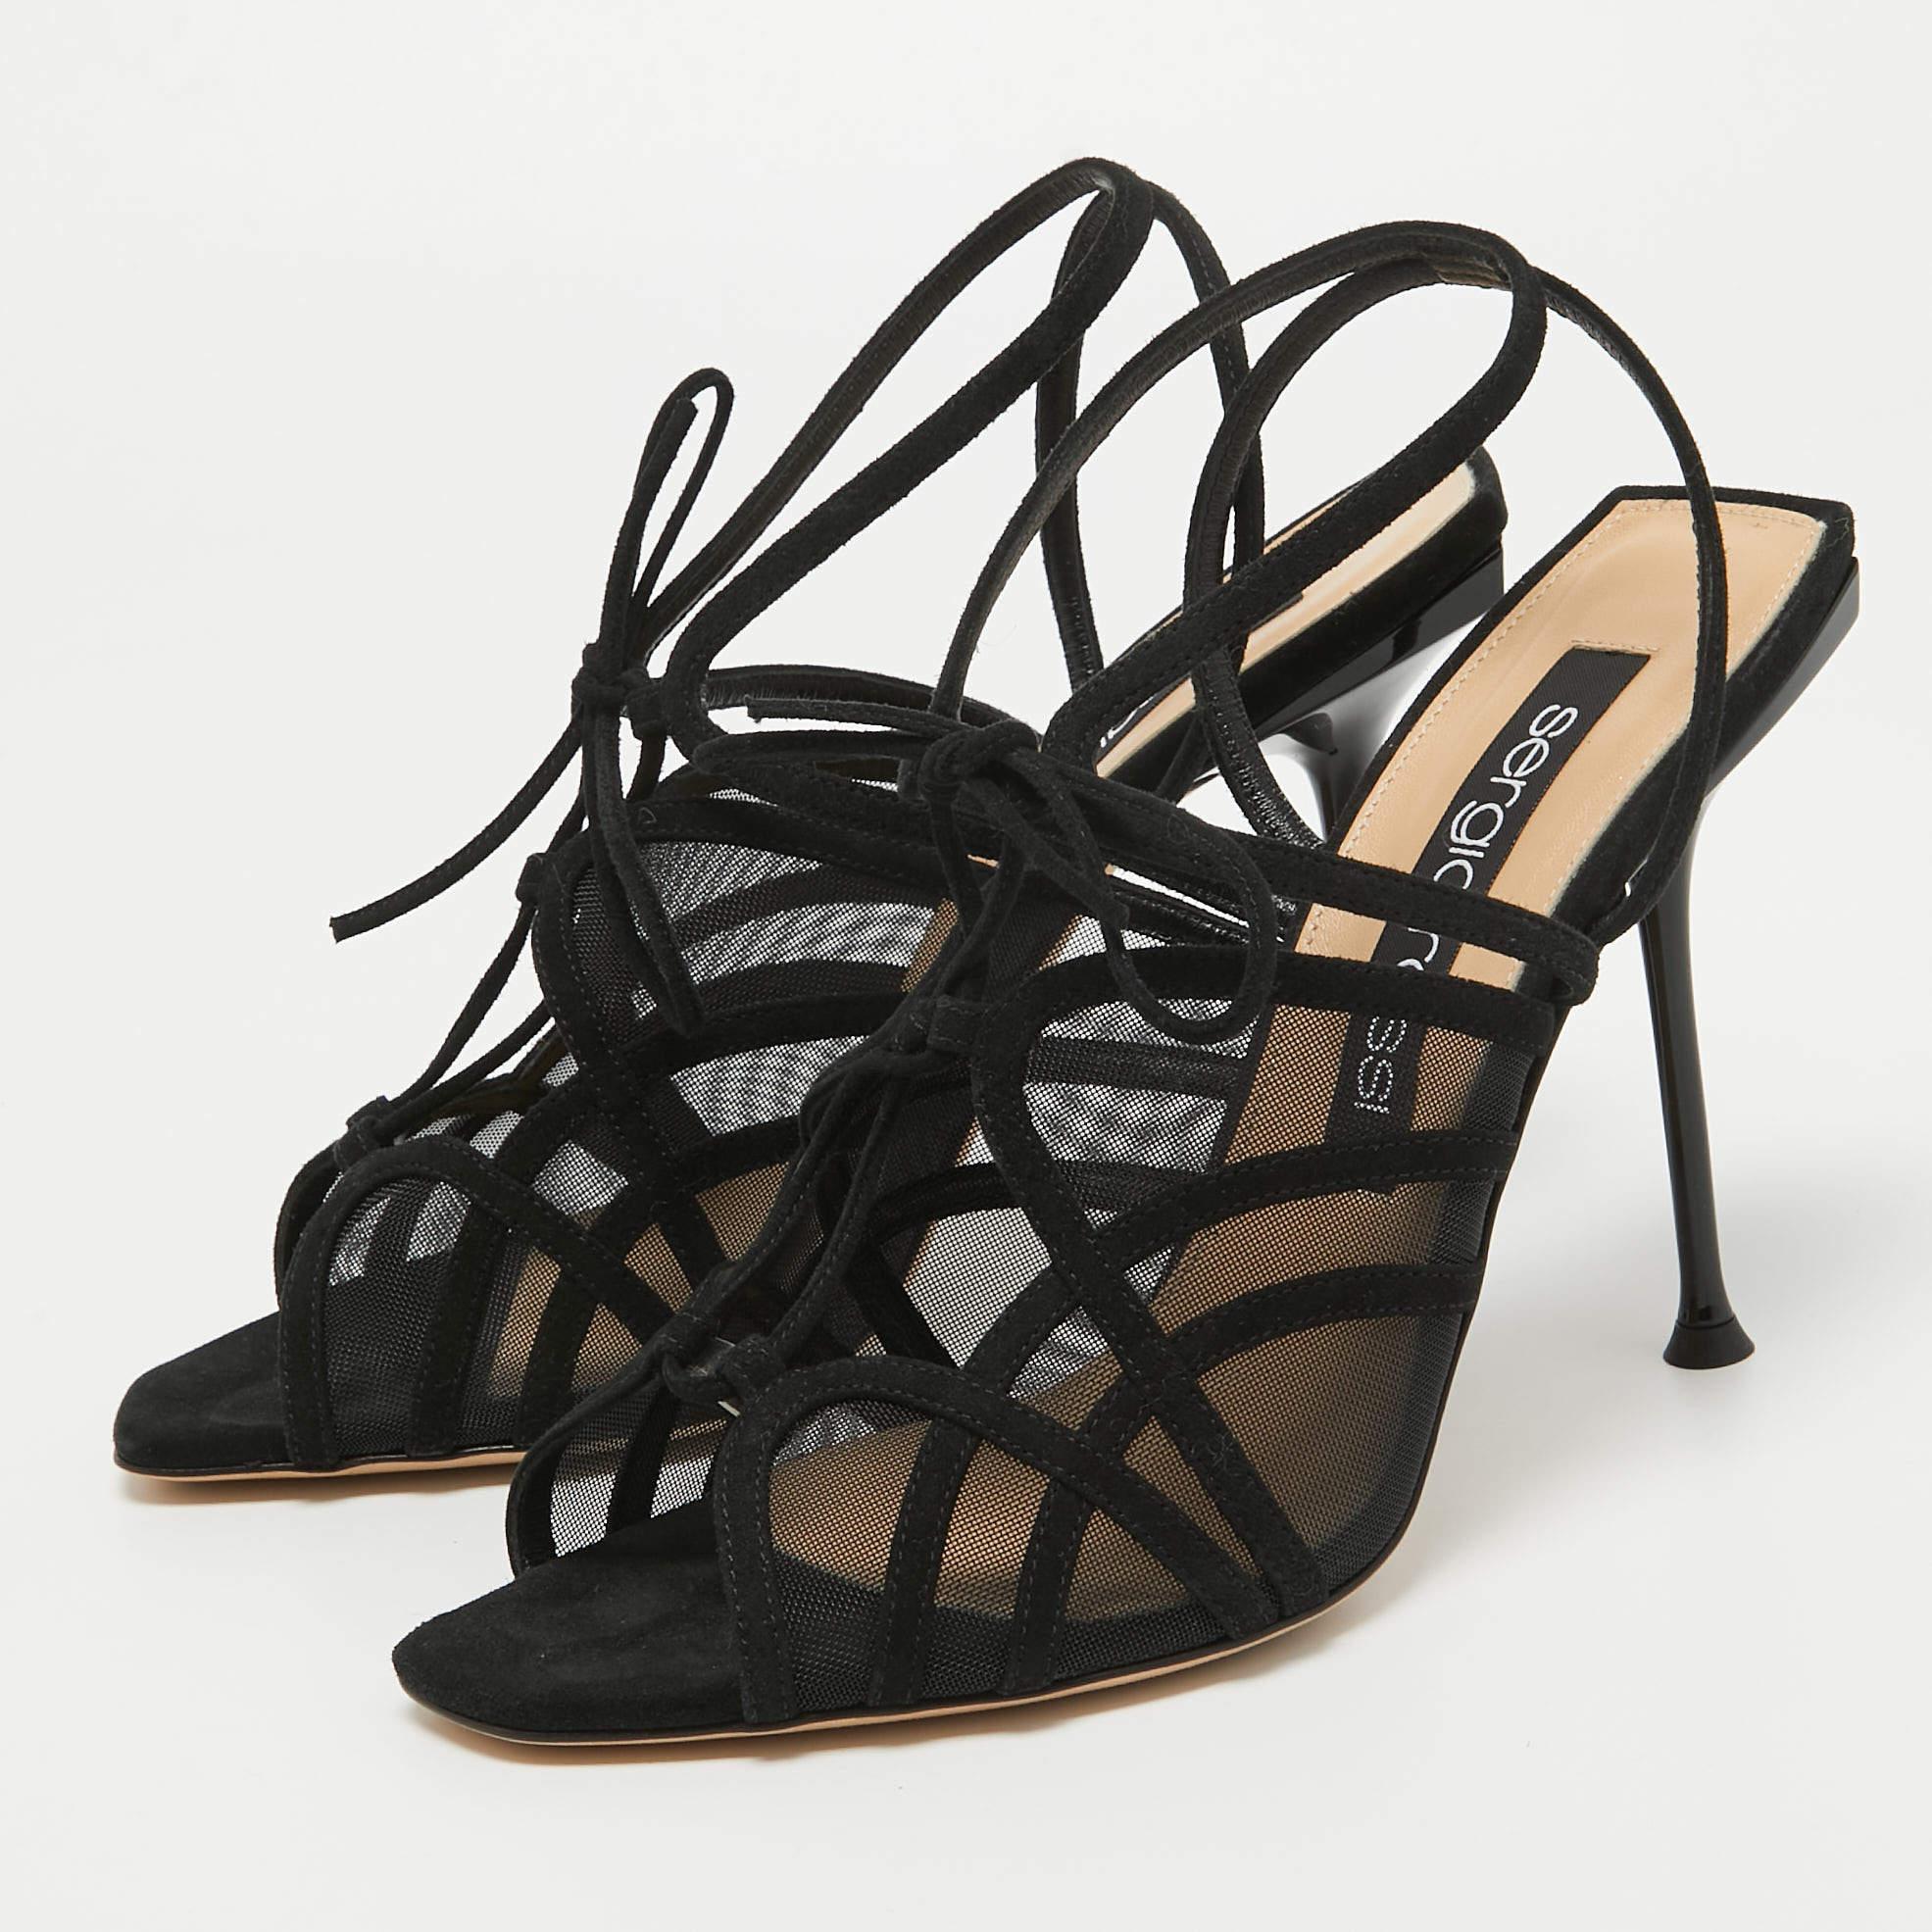 Sergio Rossi Black Suede and Mesh Ankle Strap Sandals Size 40 For Sale 1